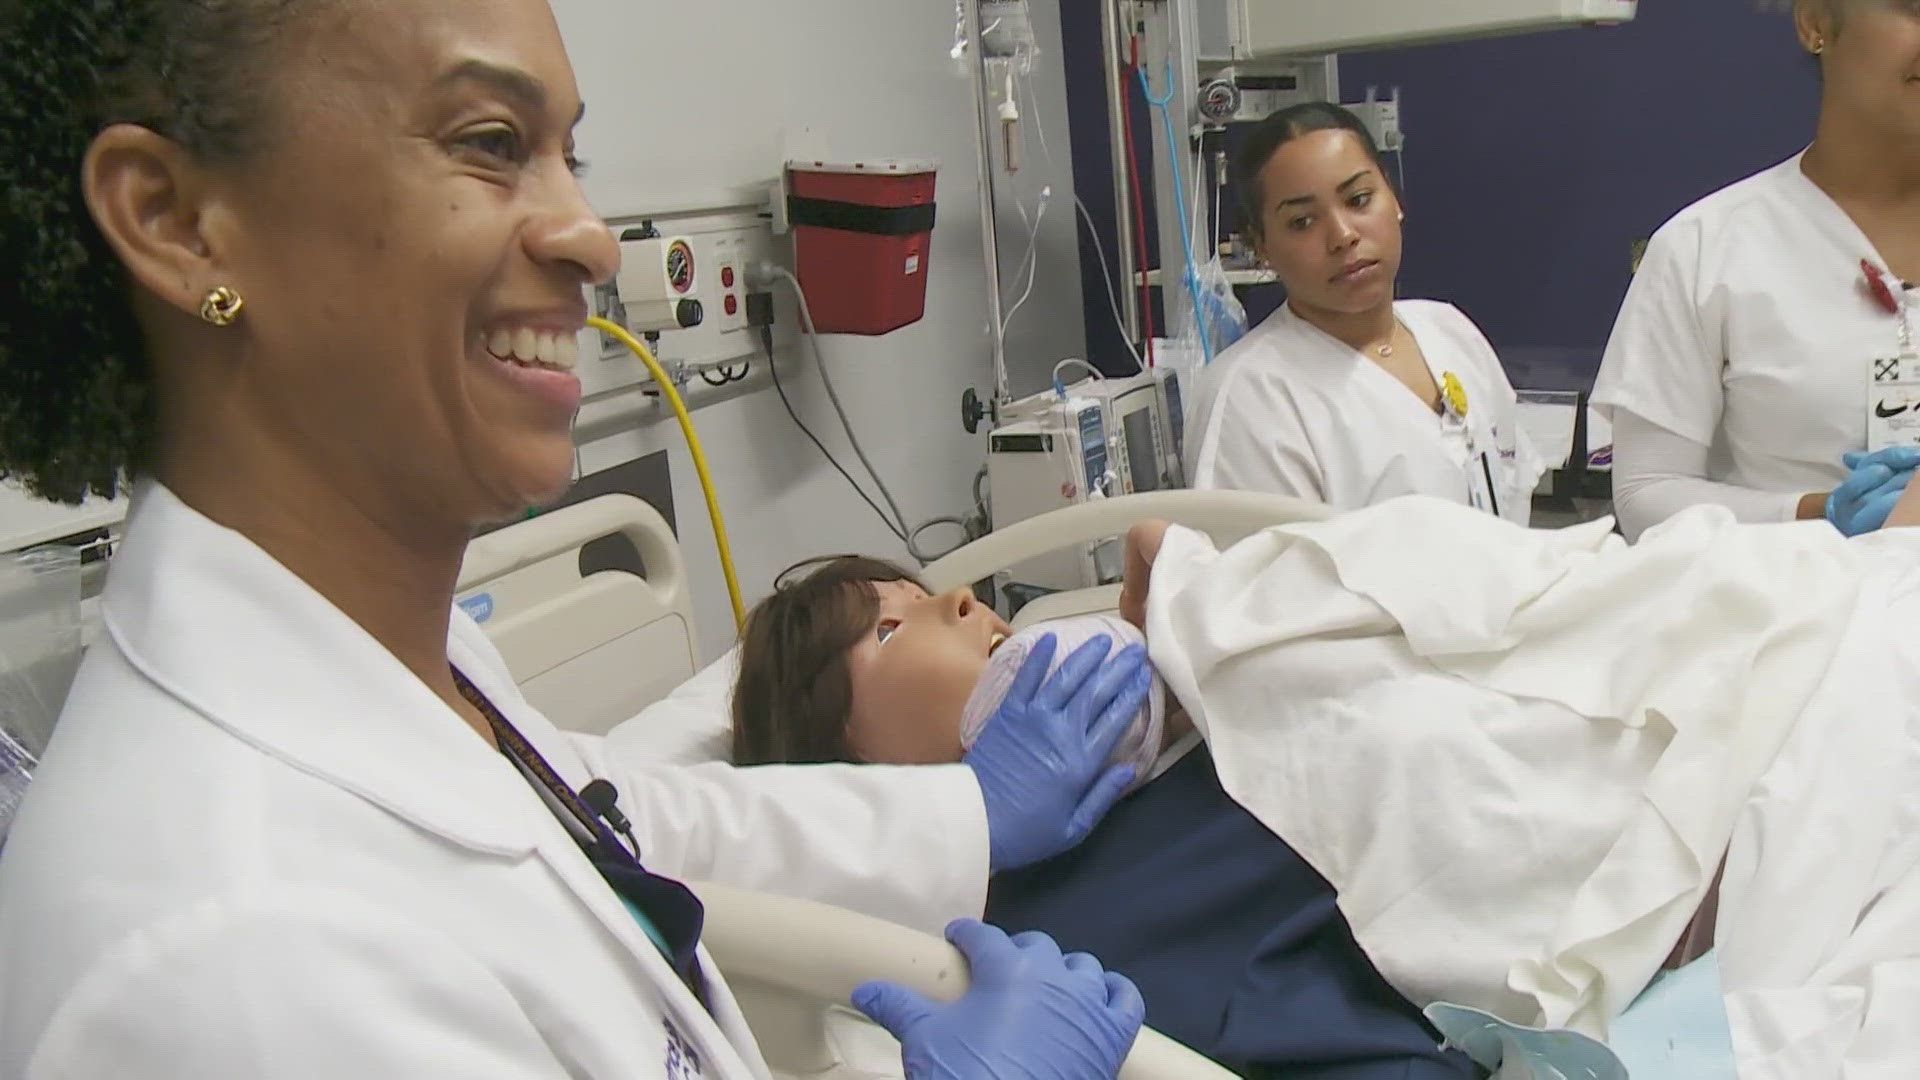 The LSU nursing program has new simulation labs to train registered nurses to get advanced doctoral degrees in midwifery.